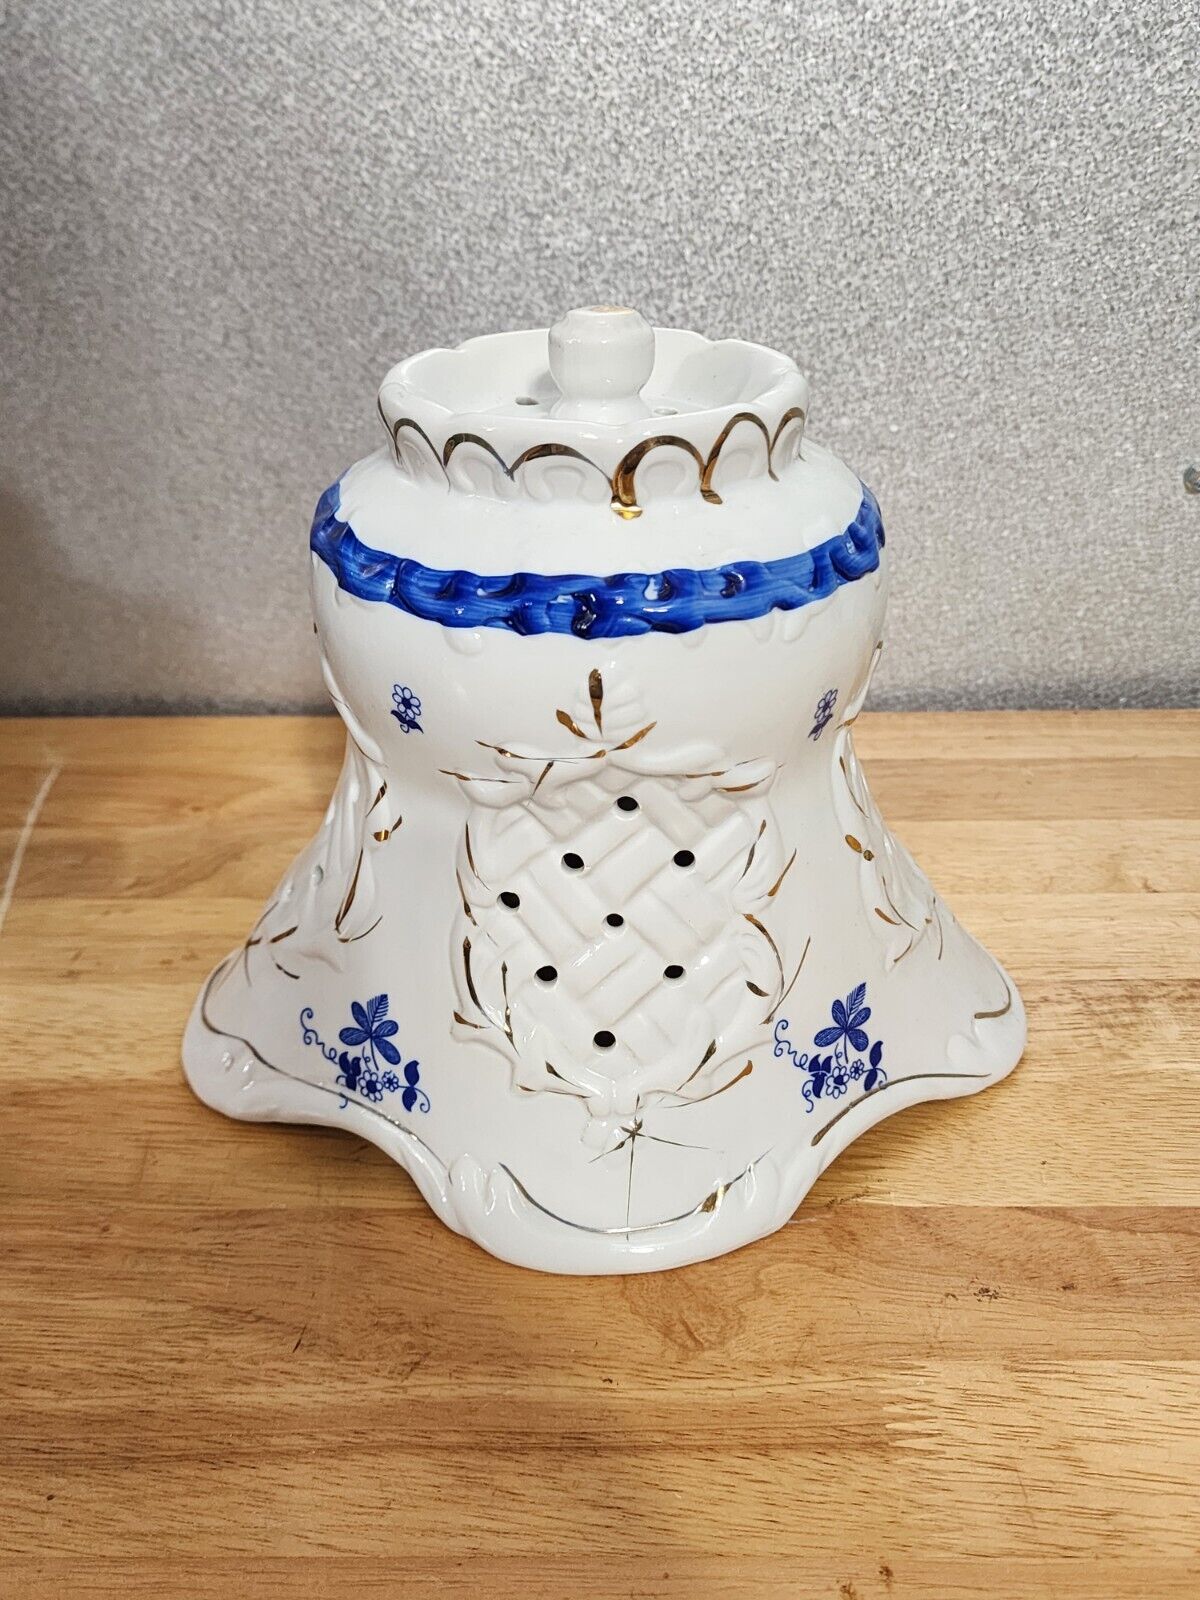 Vintage Porcelain Candle Cover 7 1/2” Tall White Blue Flowers